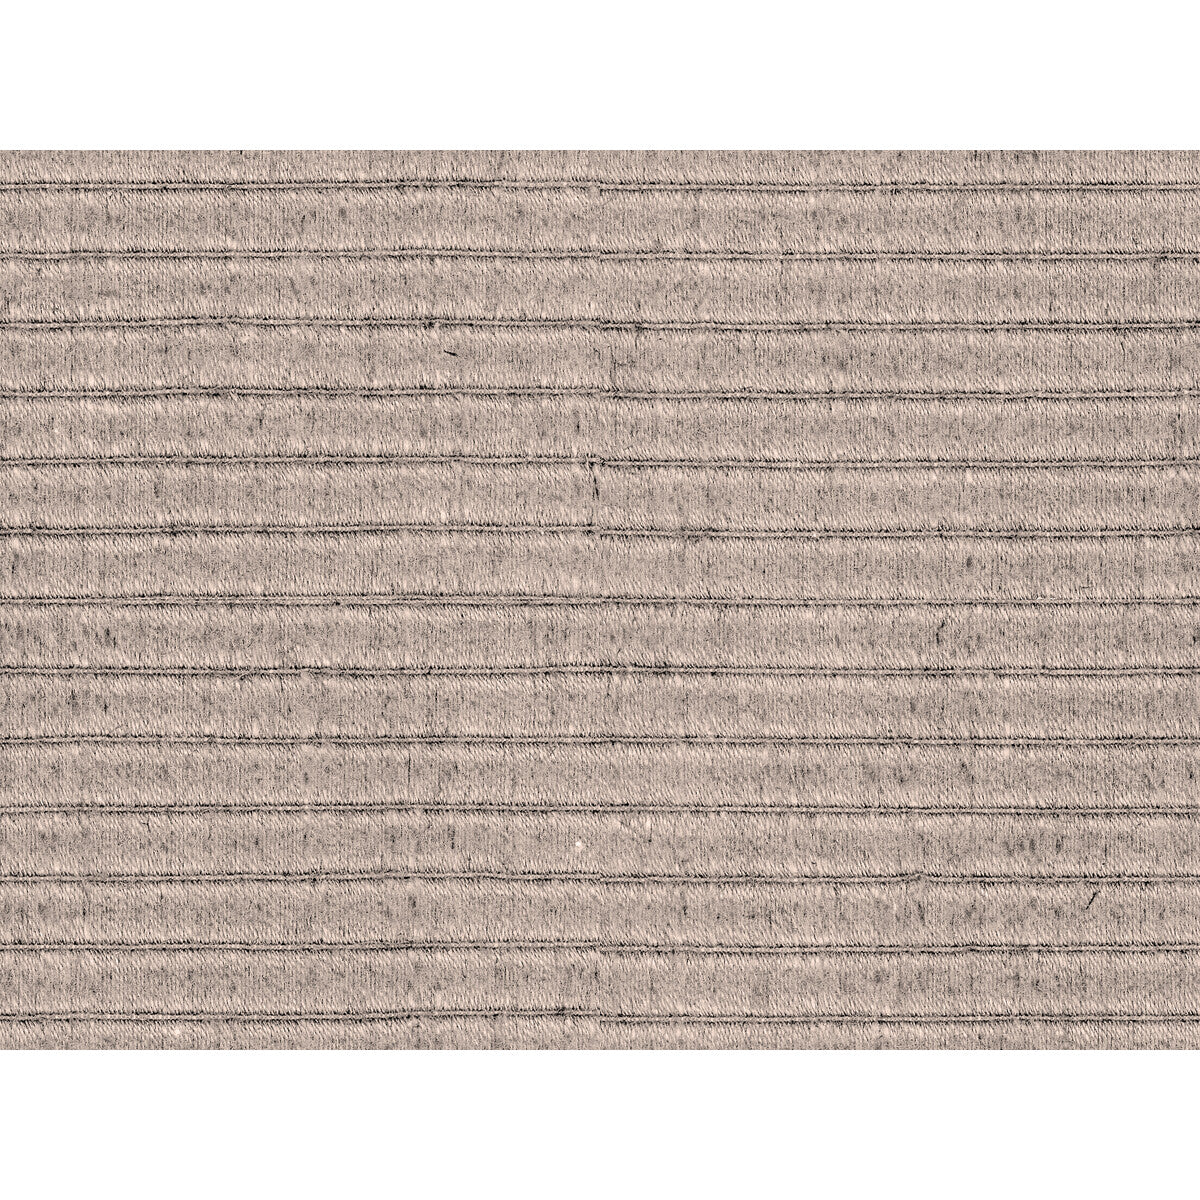 Heavy Weight fabric in pebble color - pattern 32995.106.0 - by Kravet Couture